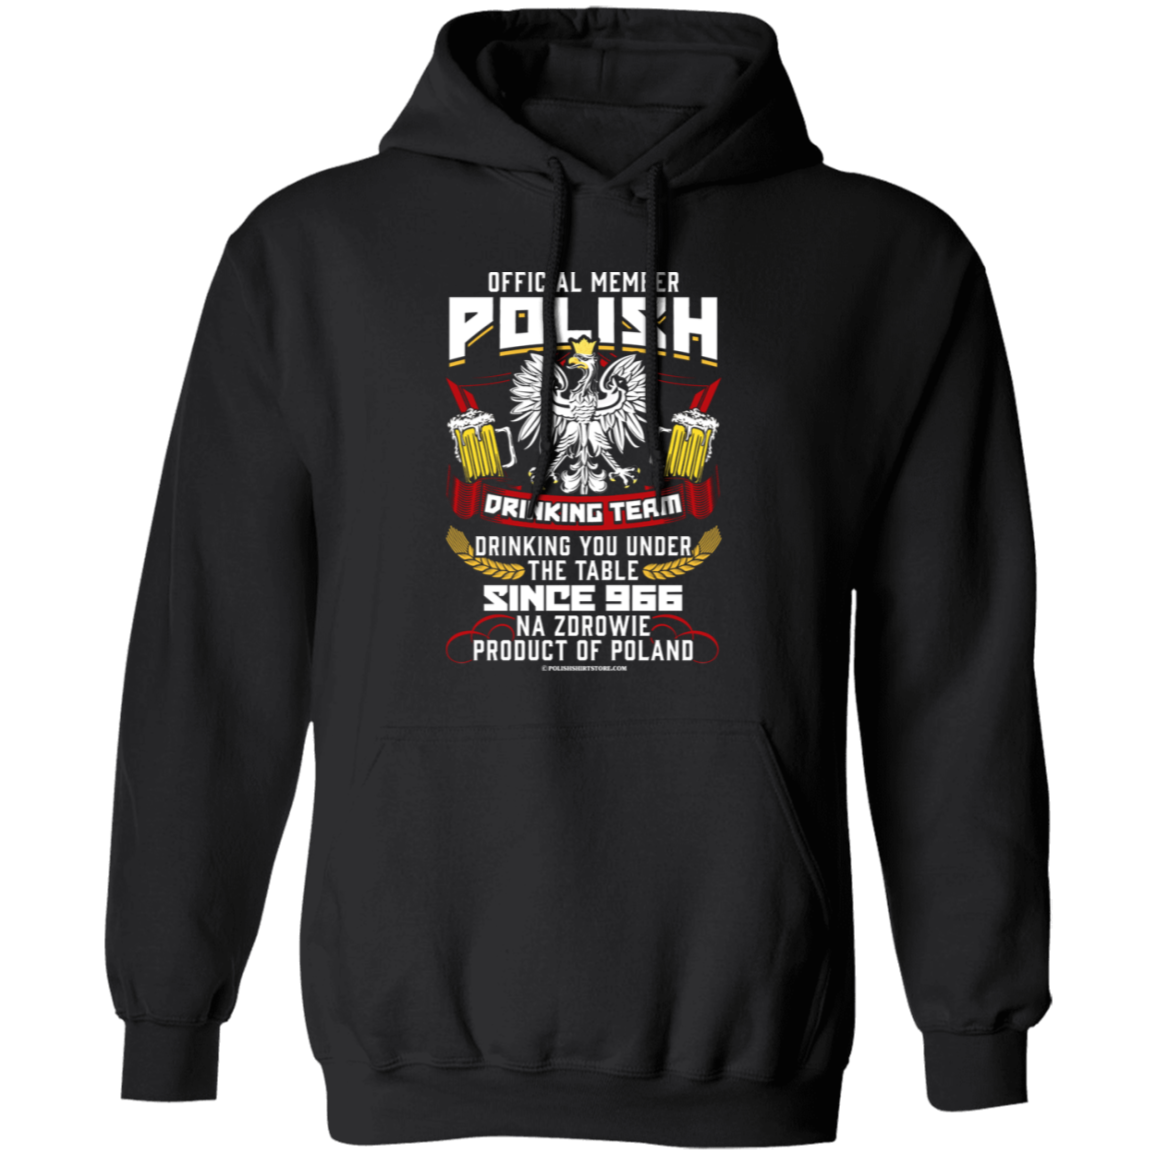 Polish Drinking Team Drinking You Under The Table Since 966 Apparel CustomCat G185 Pullover Hoodie Black S